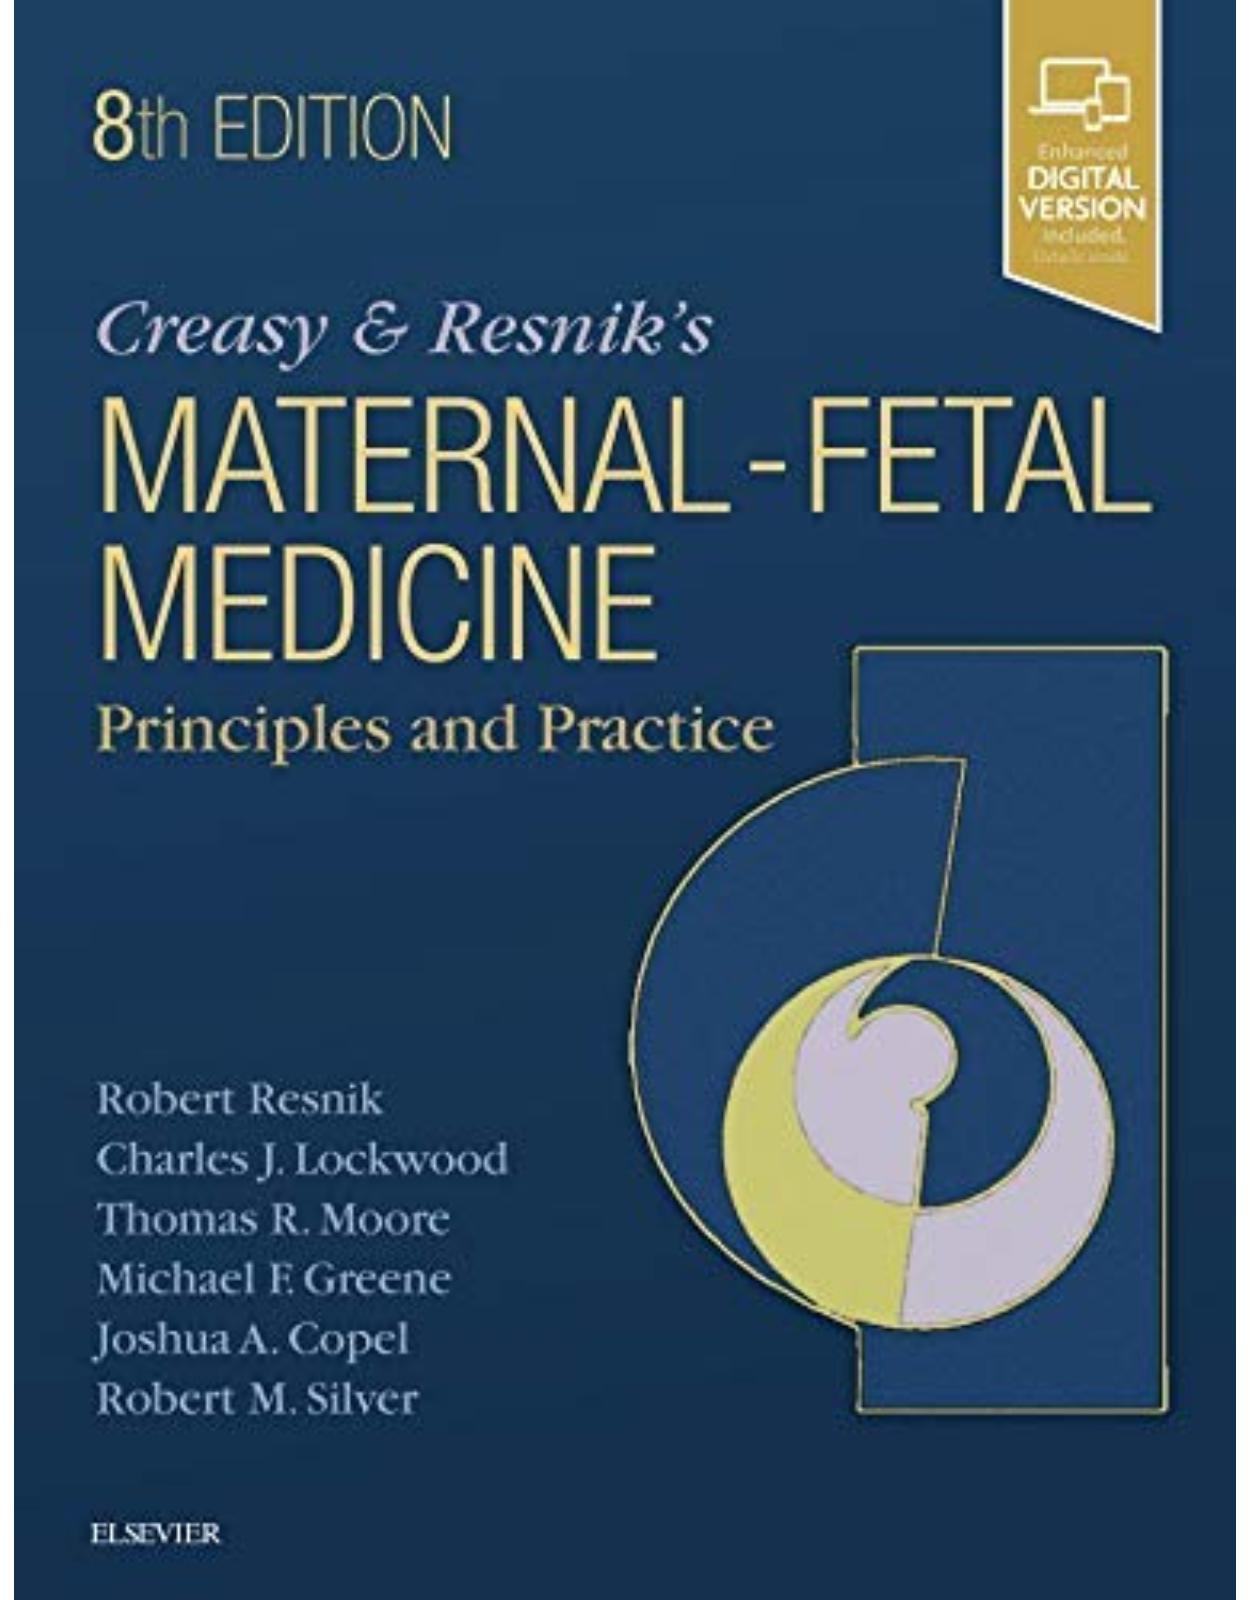 Creasy and Resnik’s Maternal-Fetal Medicine: Principles and Practice, 8th Edition